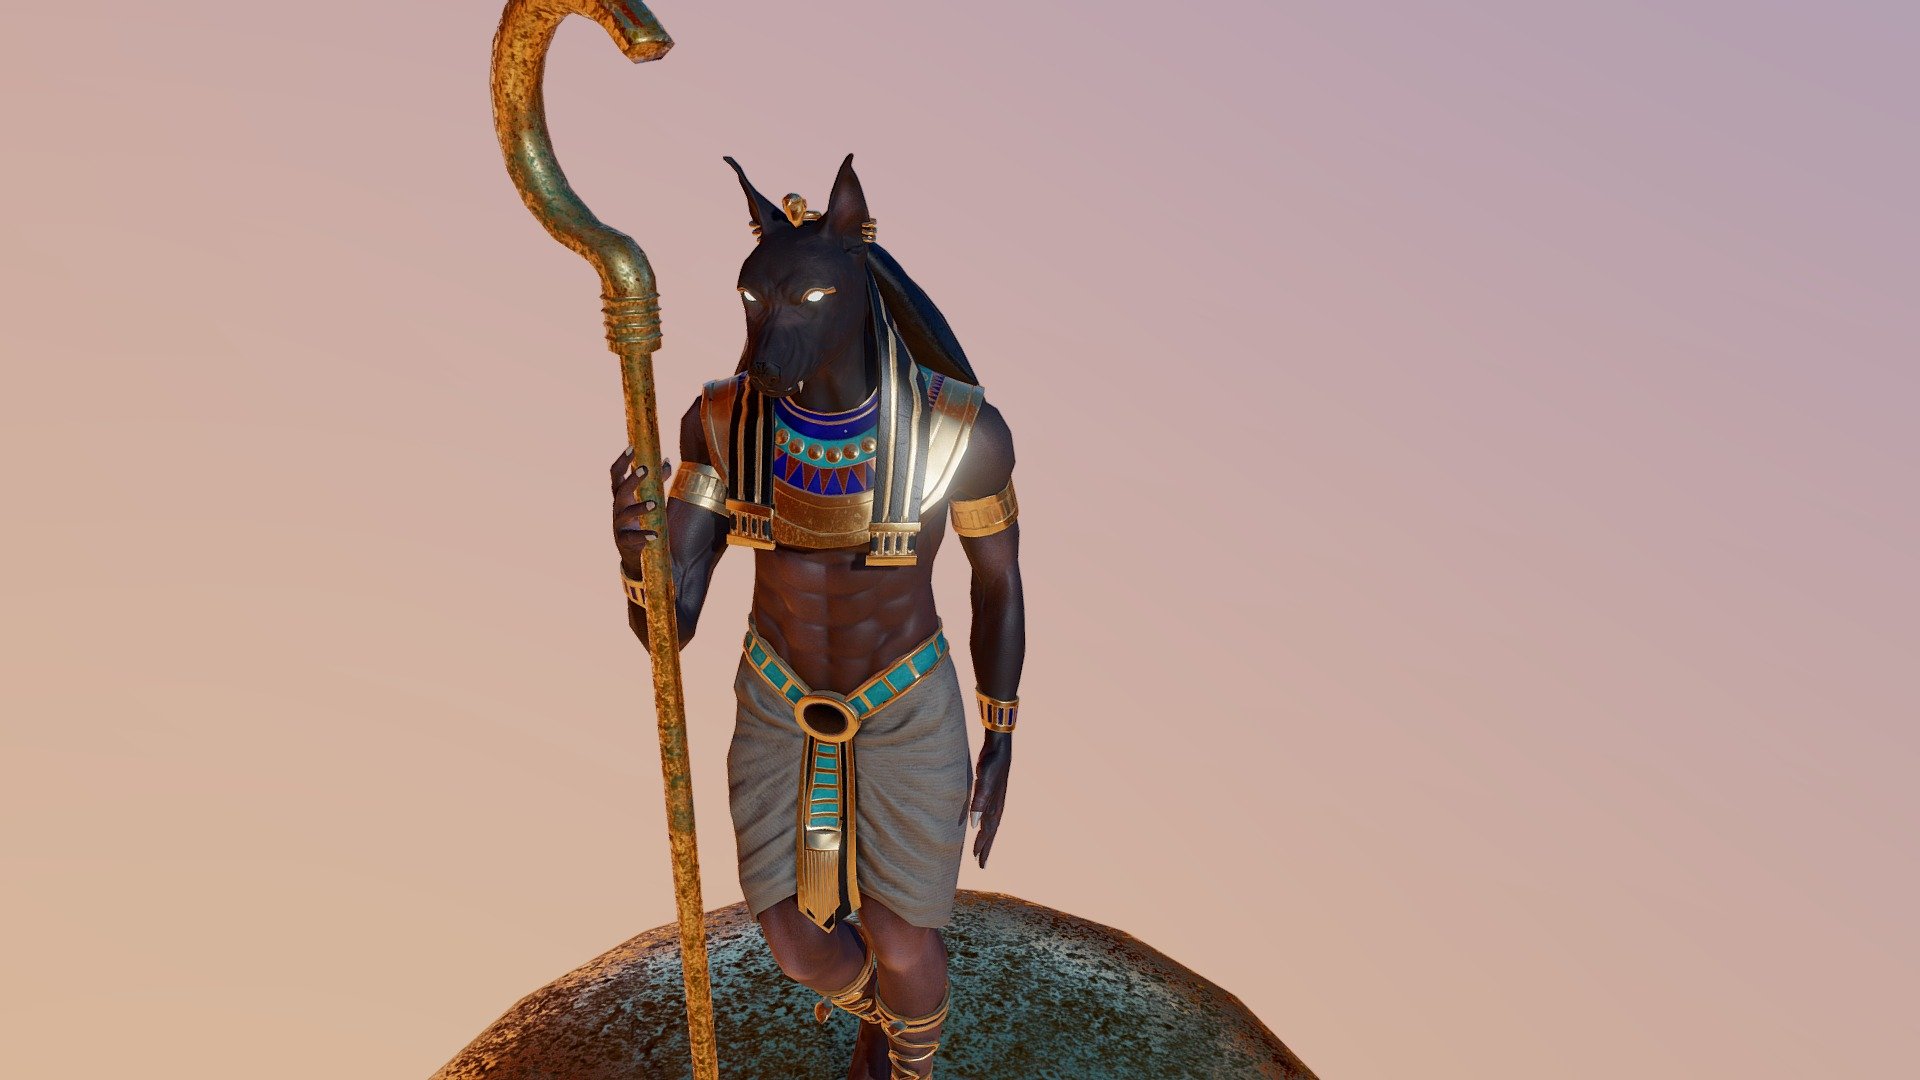 It is Anubis that I designed to be a character in video games.
- It used Dota material in substance painter.
- PBR mapping - Anubis - 3D model by THEBEARS (@AMars77) 3d model